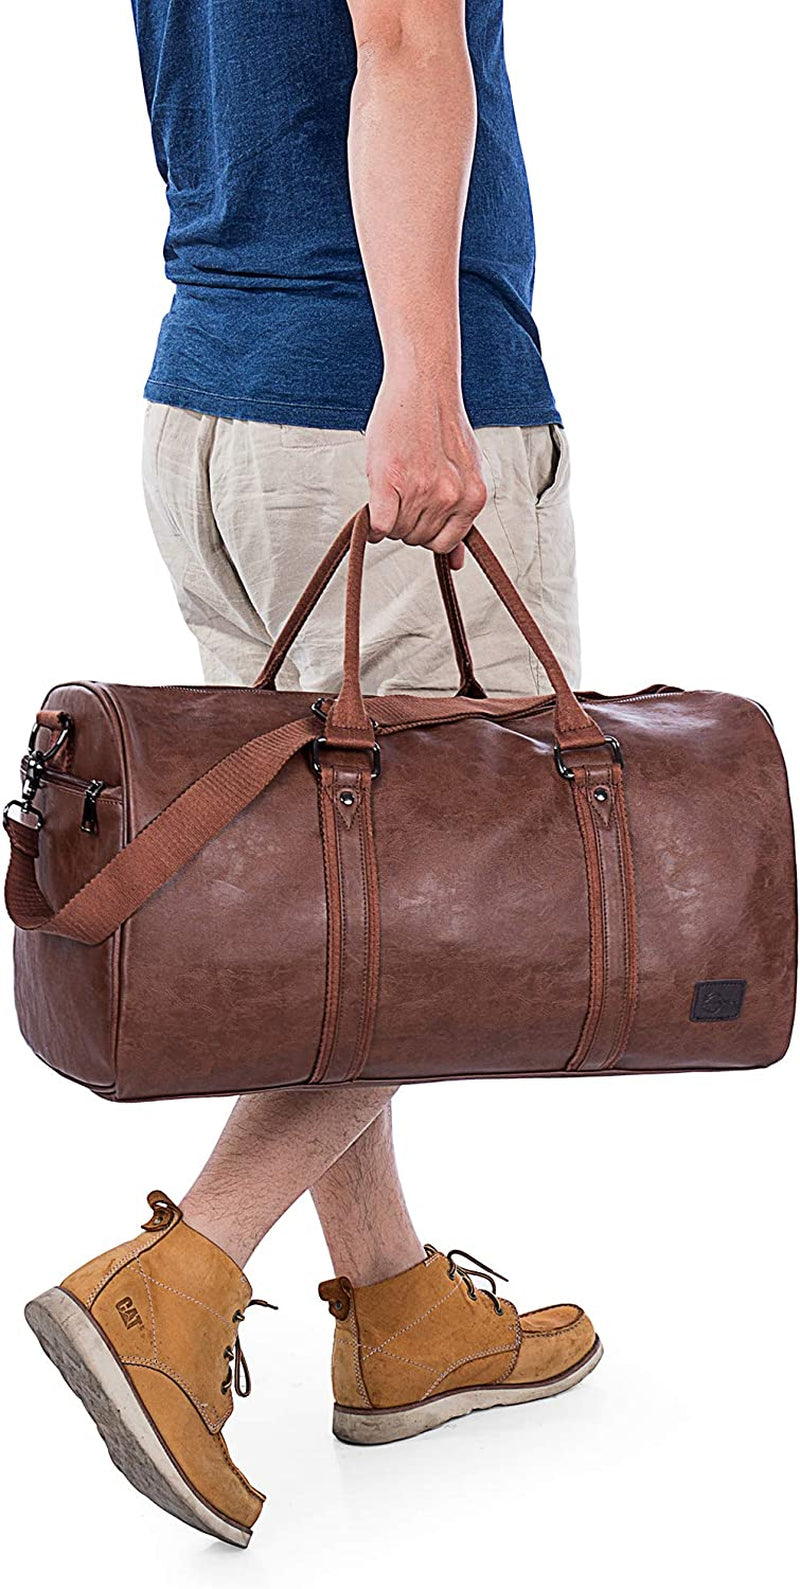 Leather Travel Bag with Shoe Pouch, Waterproof Weekender Overnight Bag, Large Carry on Duffel Bag for Men Women-Brown Home & Garden > Household Supplies > Storage & Organization seyfocnia   